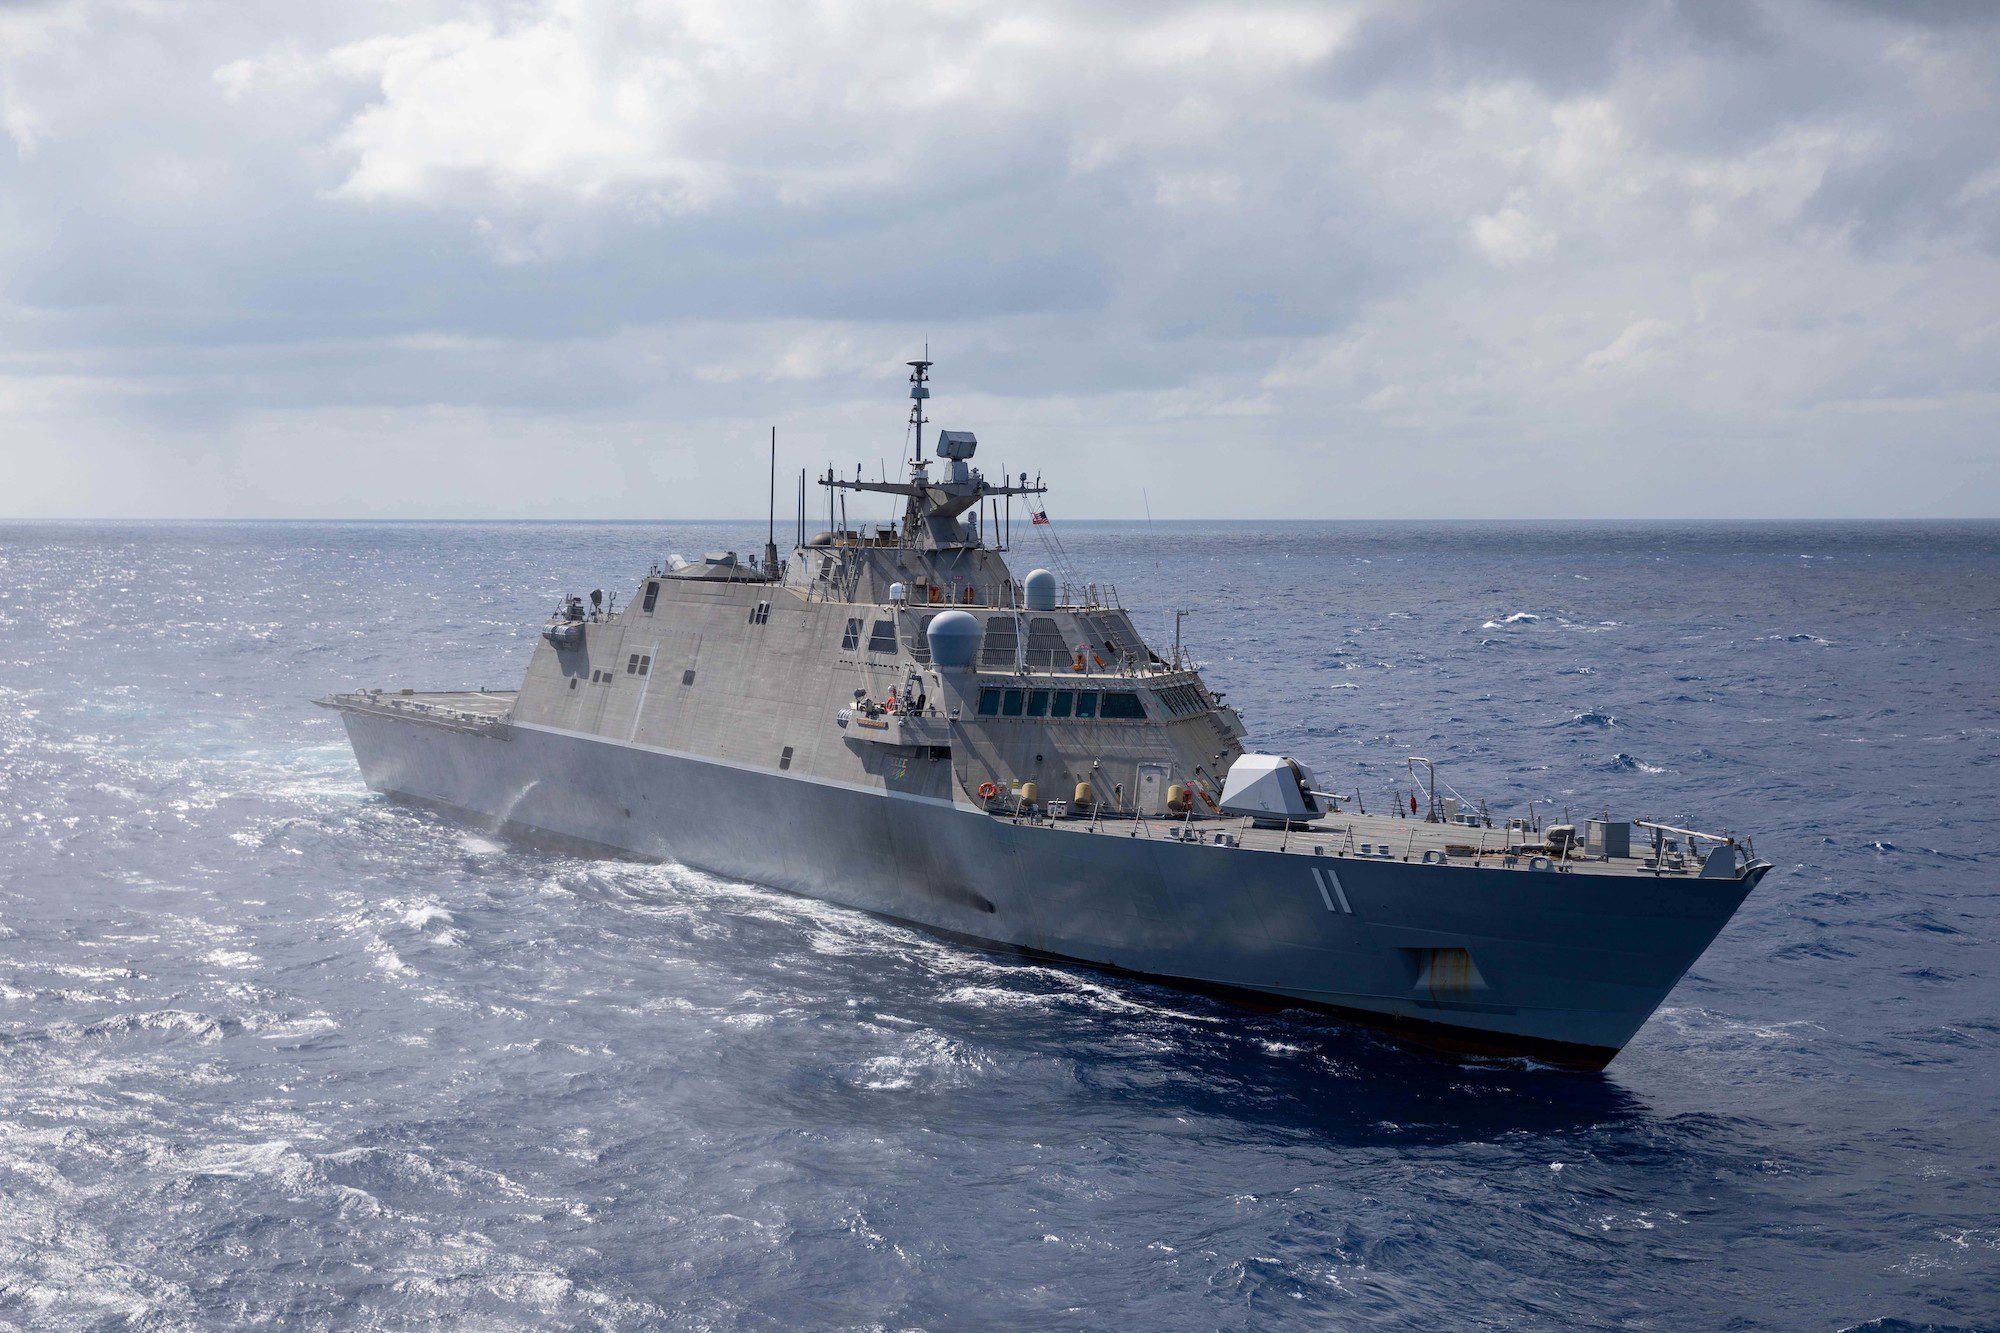 The Freedom-variant littoral combat ship USS Sioux City (LCS 11), transits the Caribbean Sea, April 10, 2021. U.S. Navy Photo